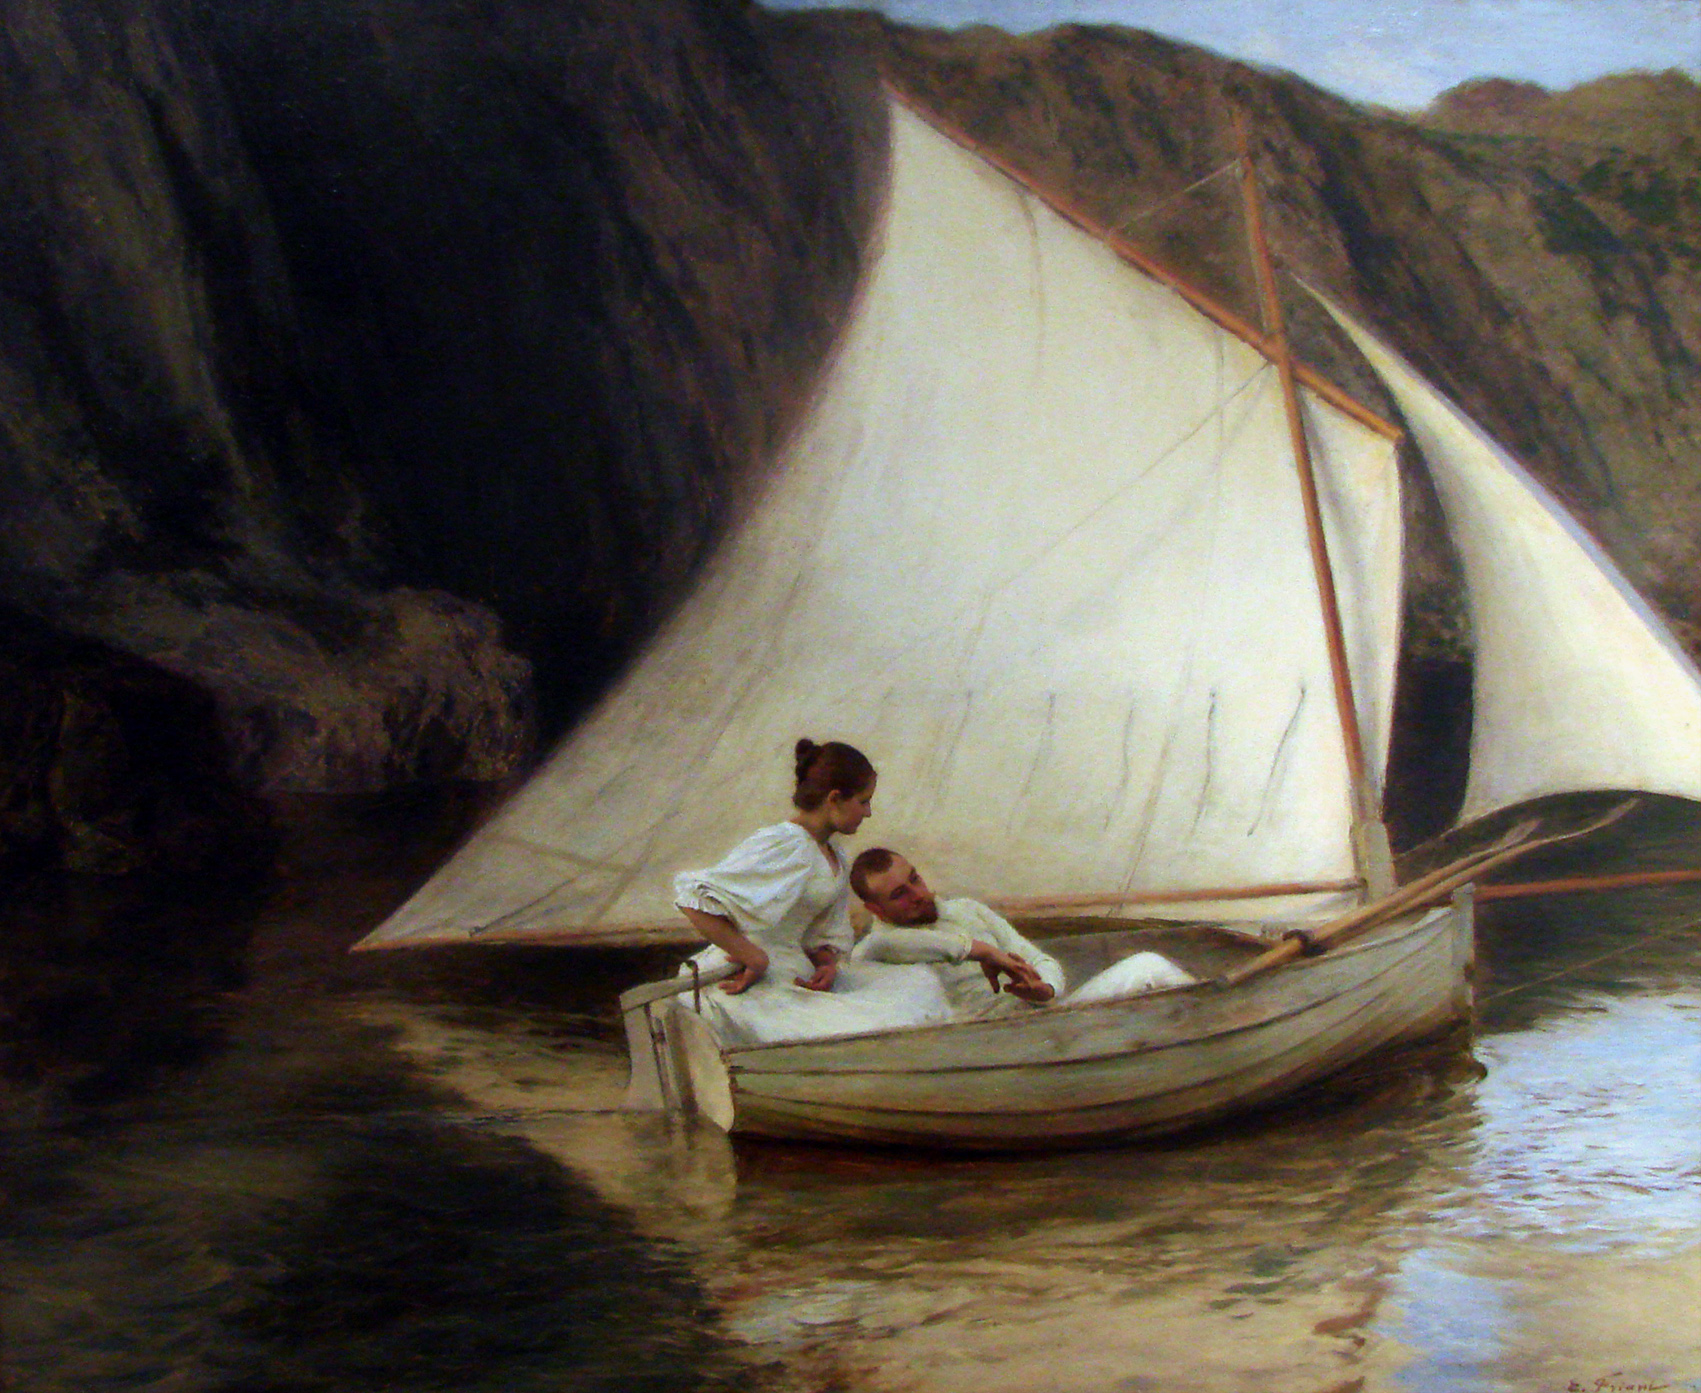 O Pequeno Barco by Émile Friant - 1895 